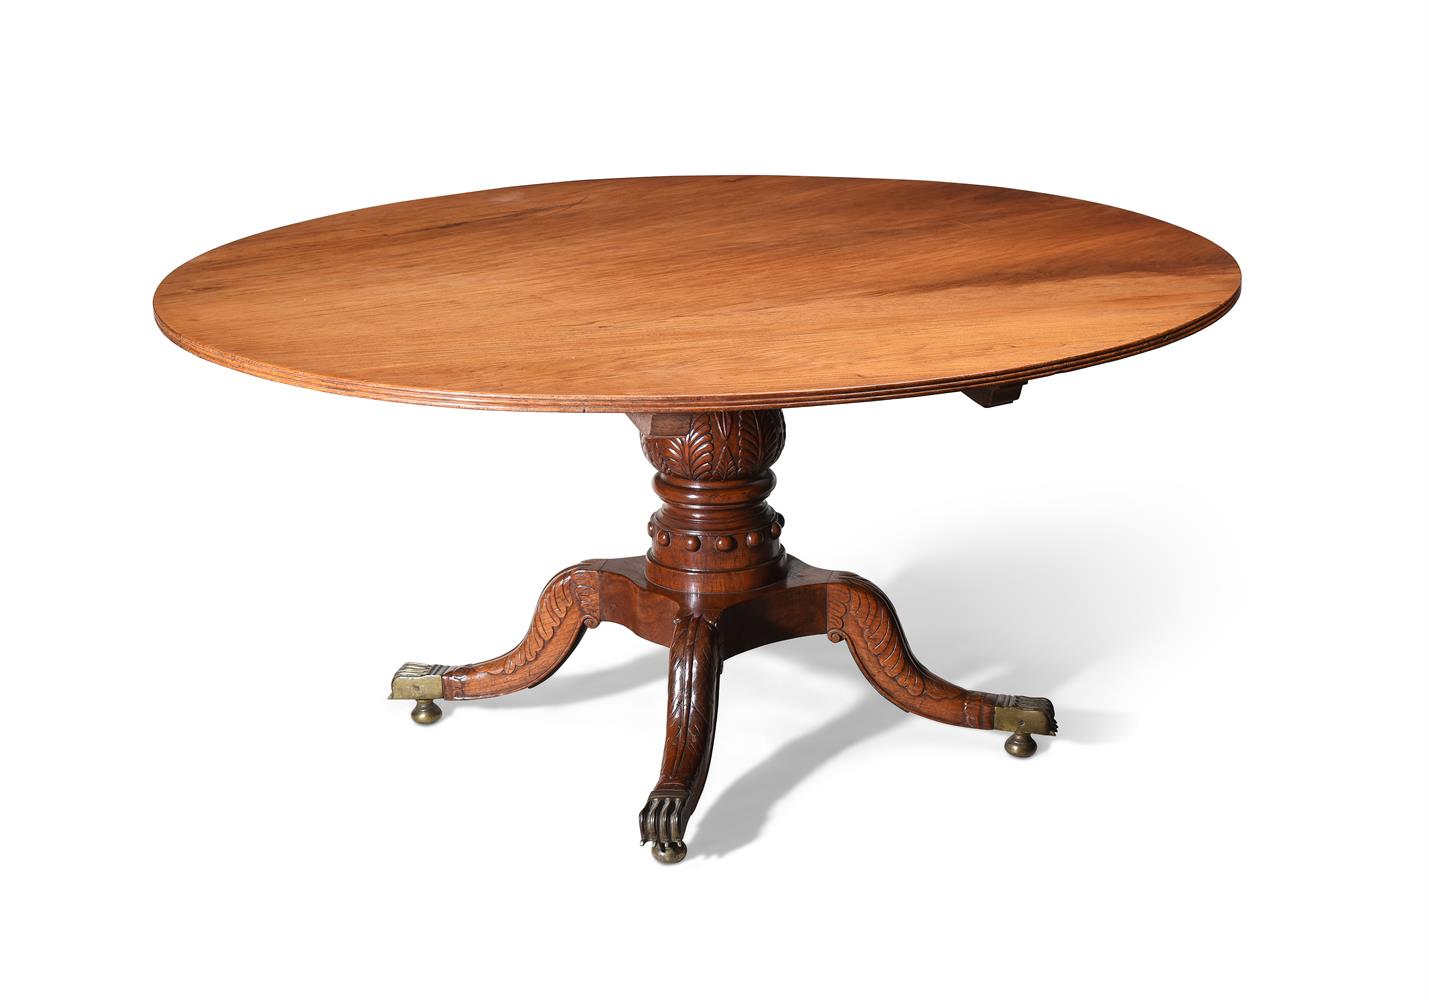 Y AN ANGLO-INDIAN CARVED PADOUK CIRCULAR CENTRE OR BREAKFAST TABLE, 19TH CENTURY